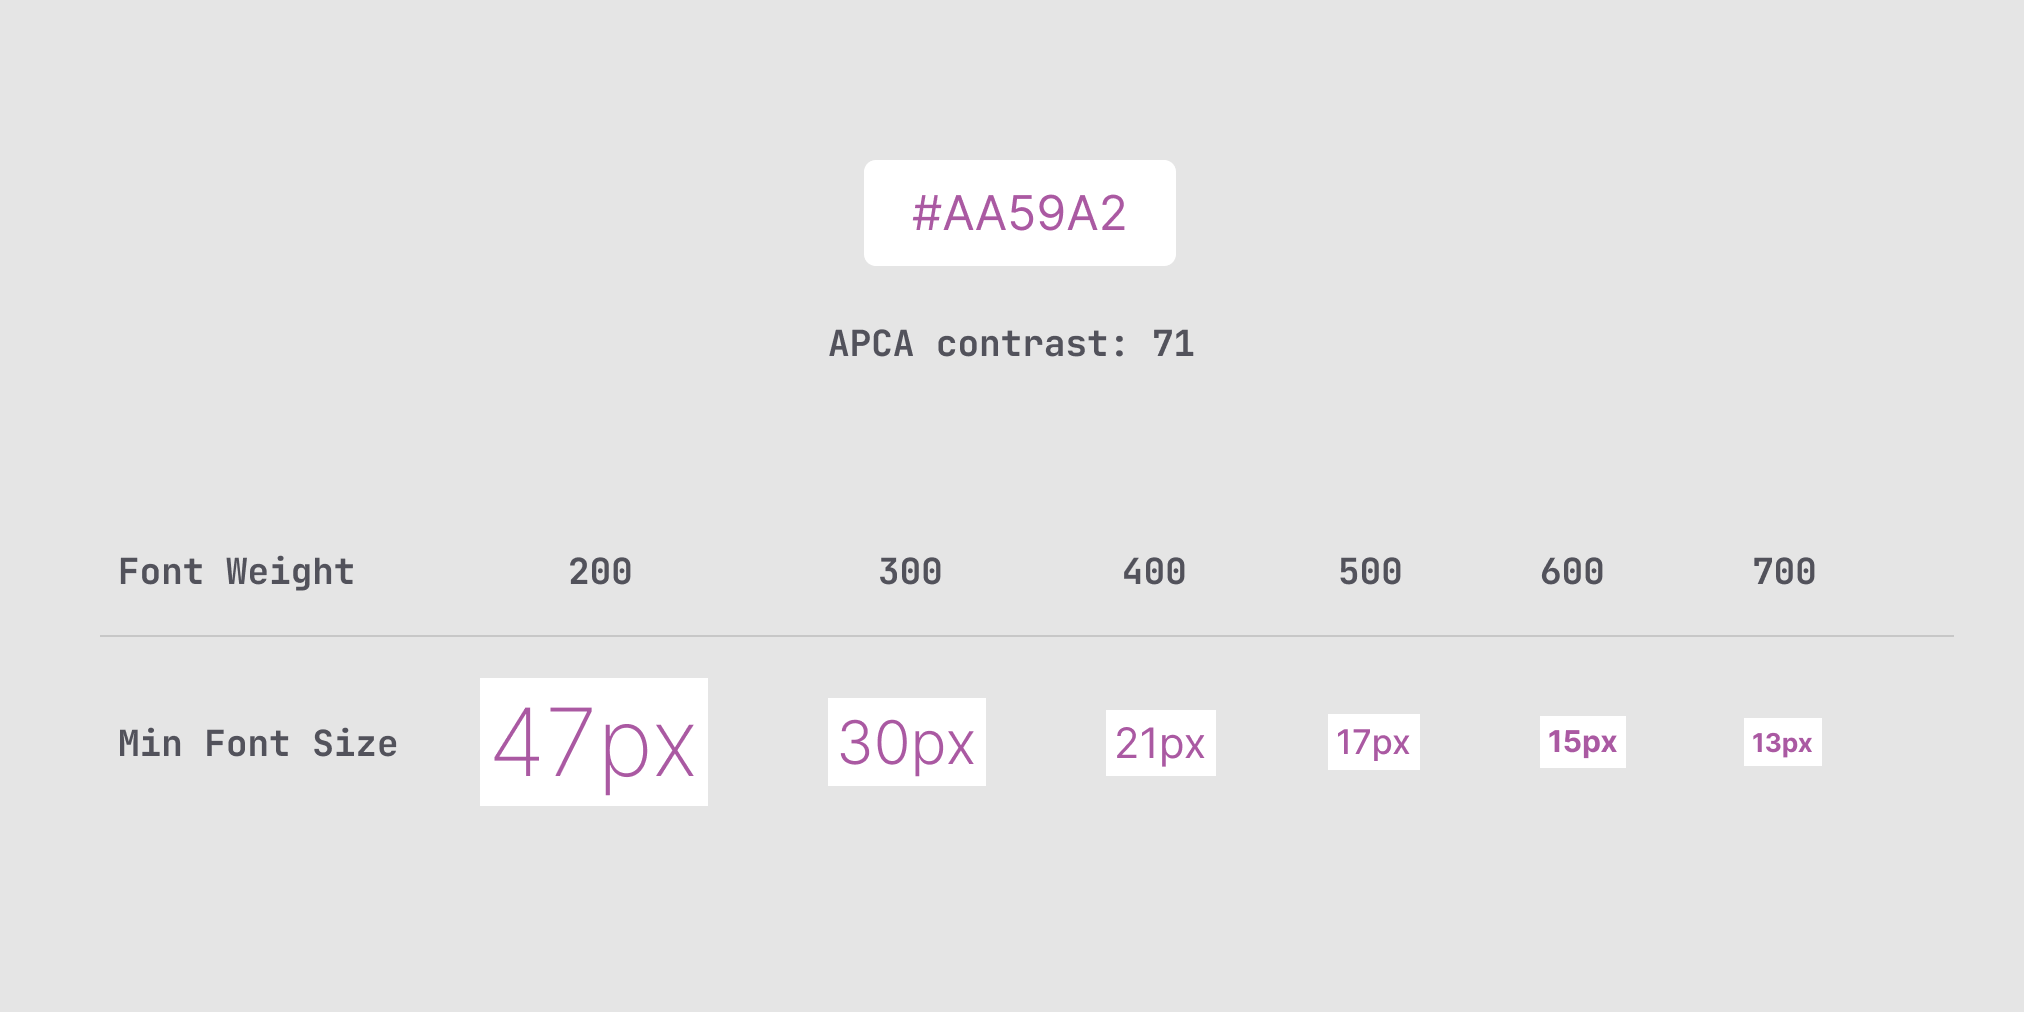 A table describing the acceptable font sizes for each font weight (200- 700). The reference color pair is #AA59A2 on a white background. The minimum font size increases as the font weight gets thinner.